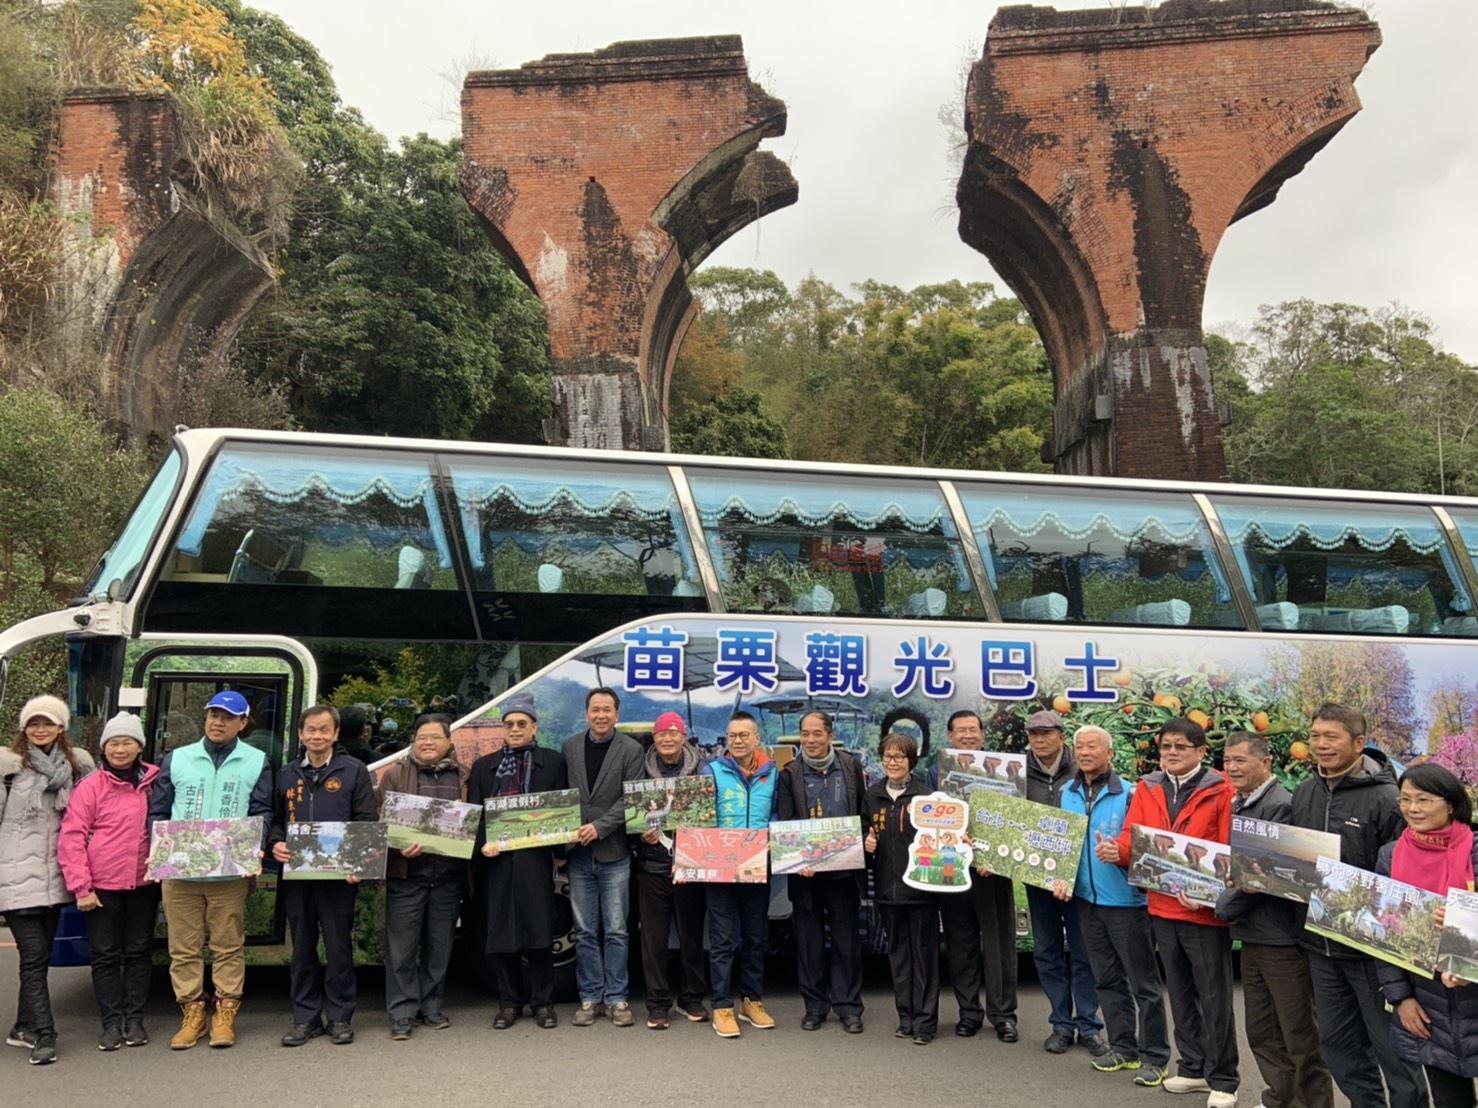 To make travelling more convenient, Miaoli launches tourist shuttles